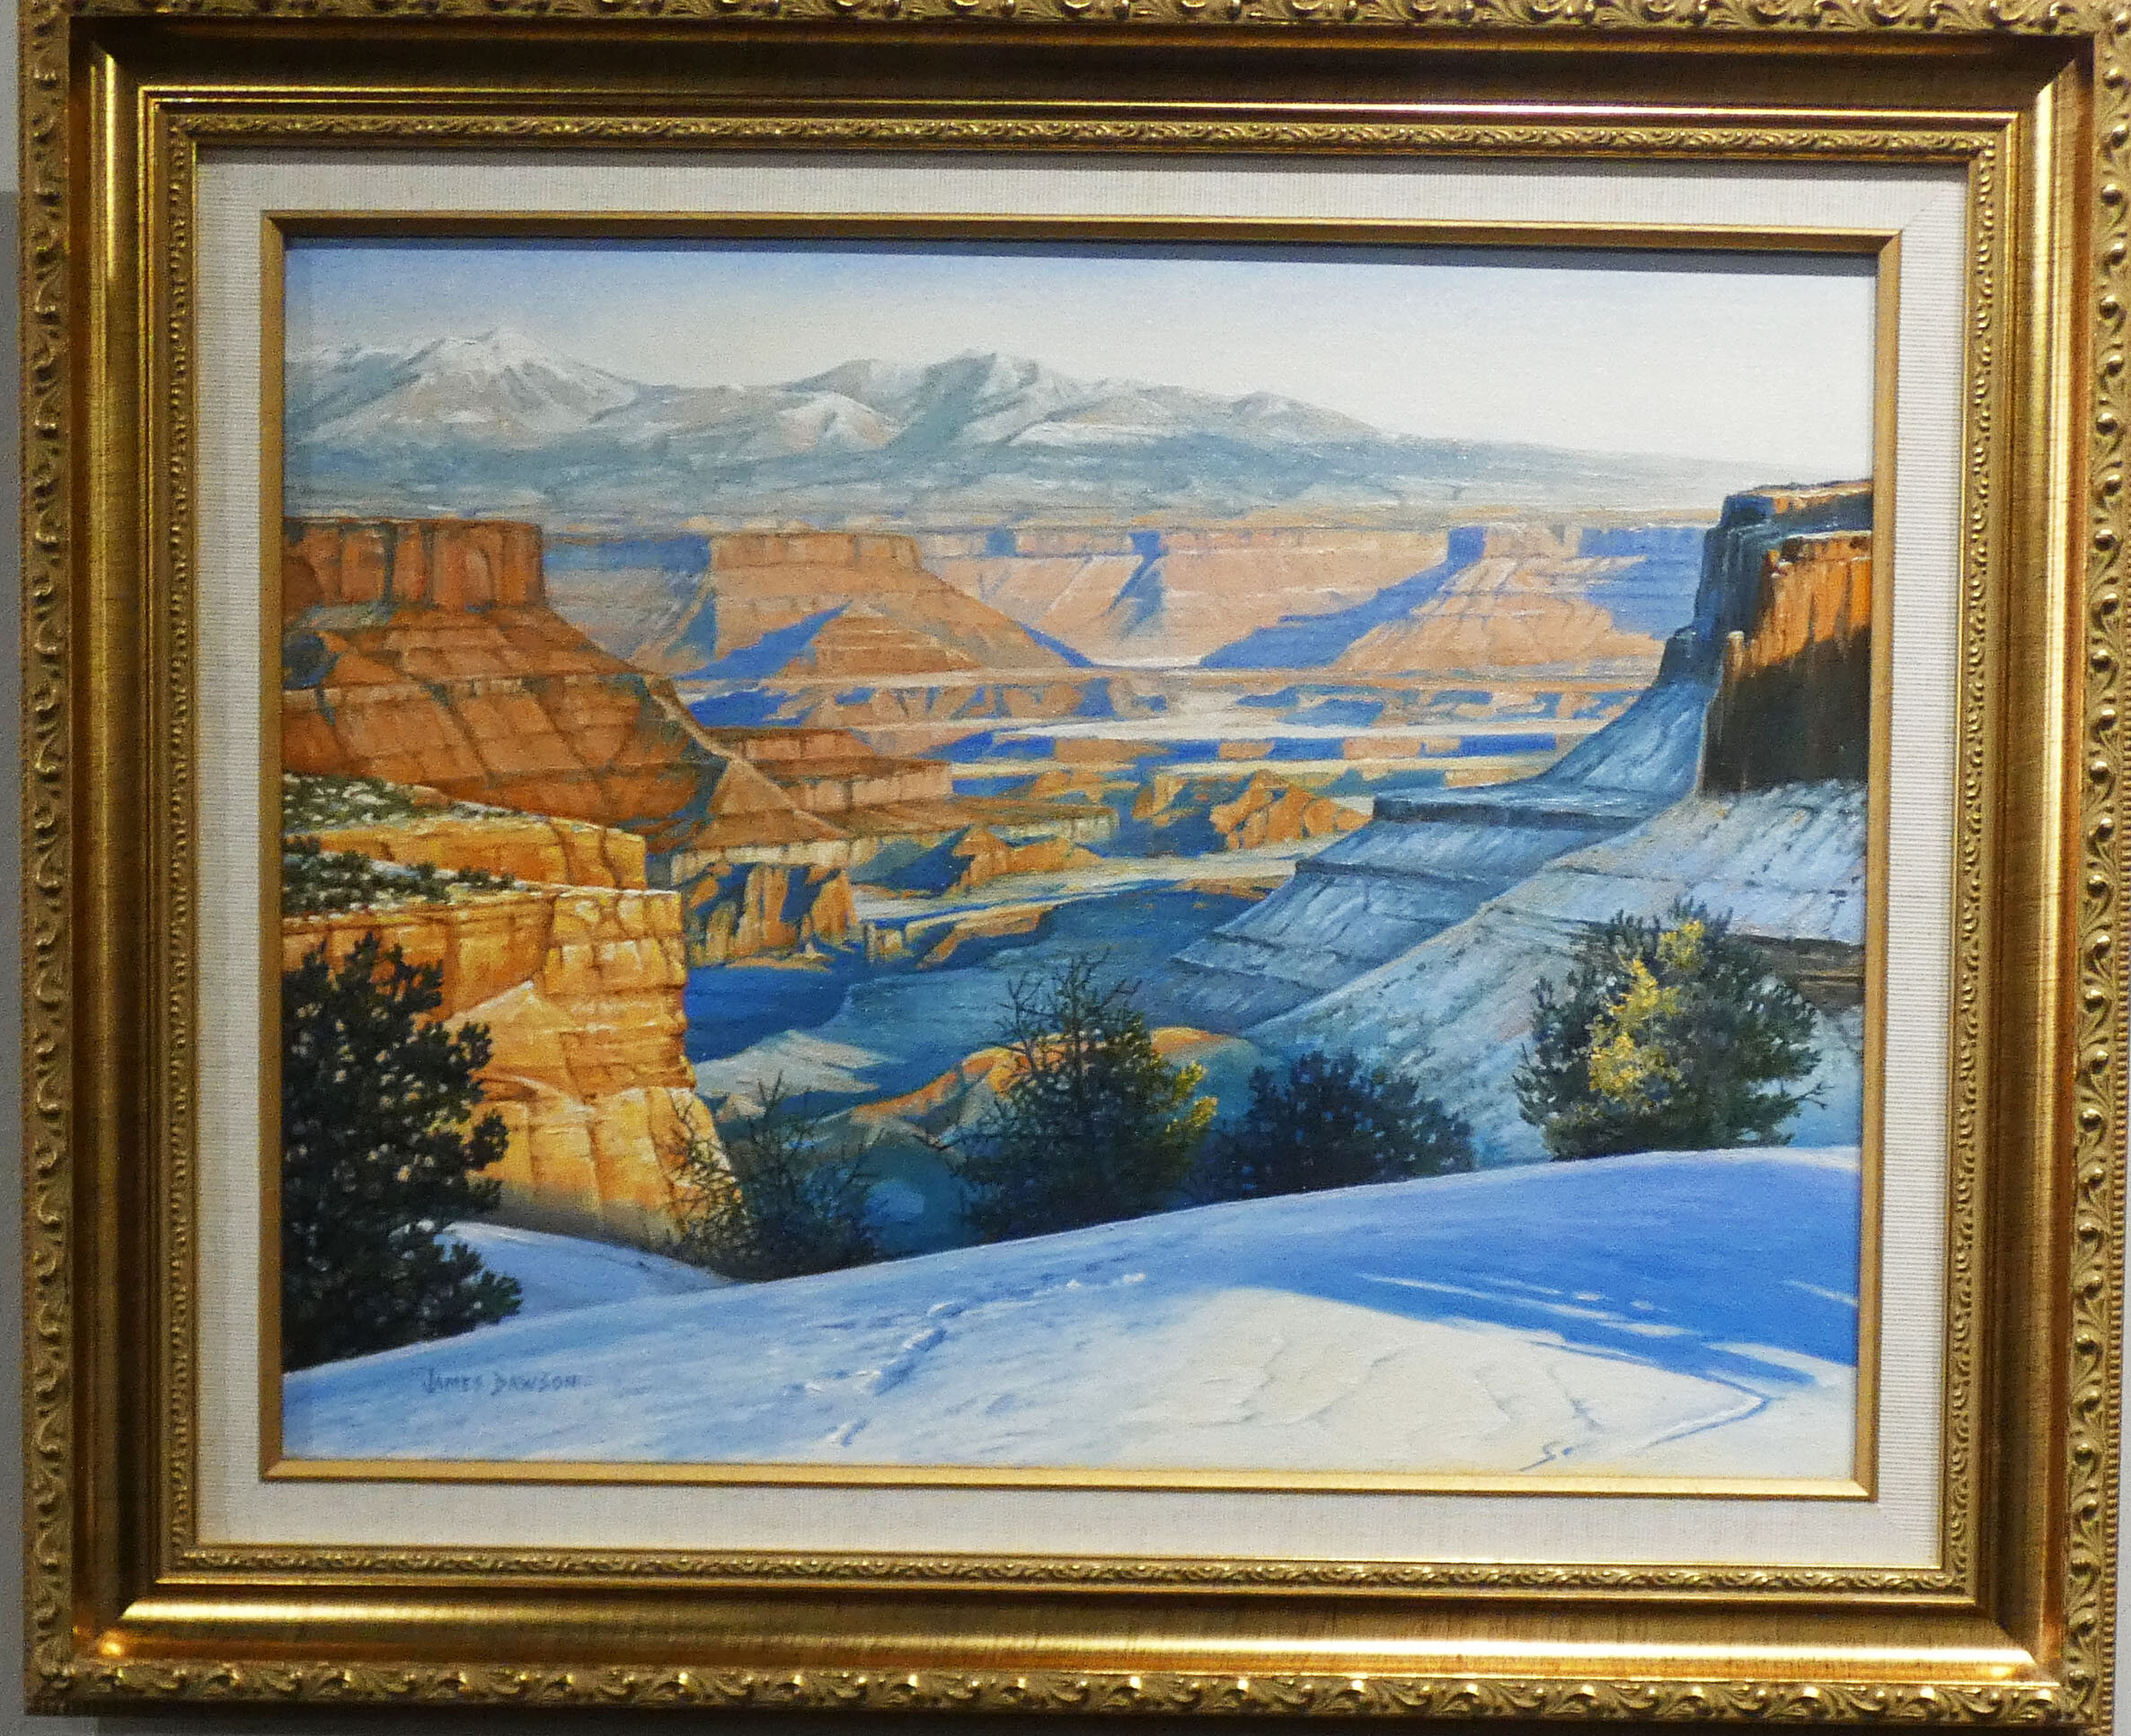 1st Place: Canyon Lands After Noon - James Dawson